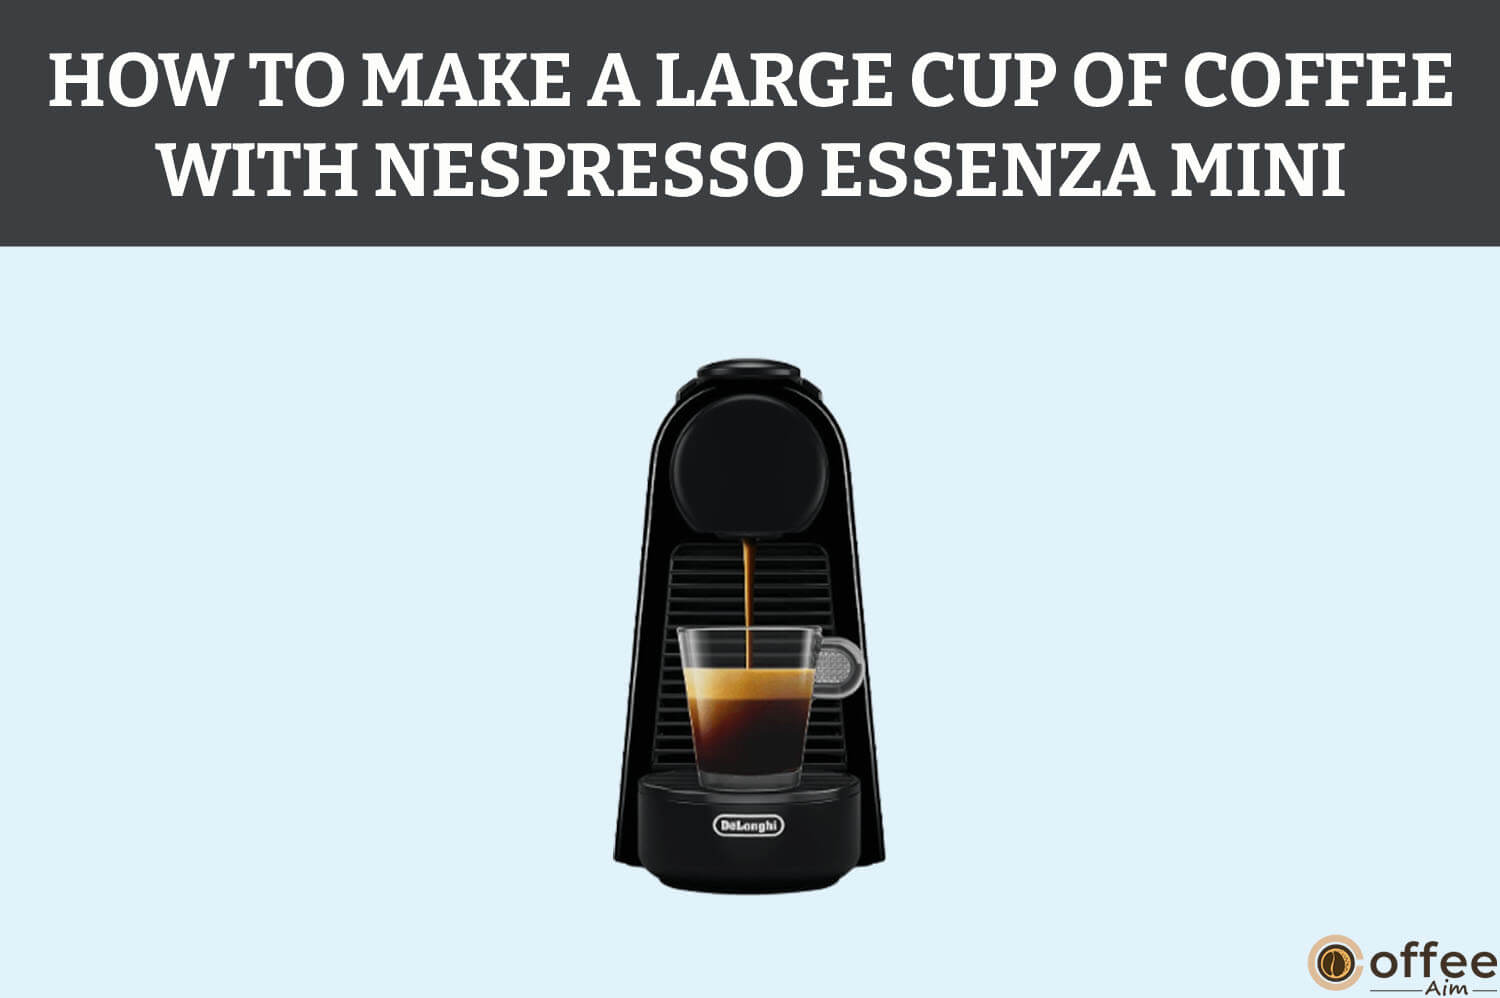 Featured image for the article "How To Make A Large Cup Of Coffee With Nespresso Essenza Mini"